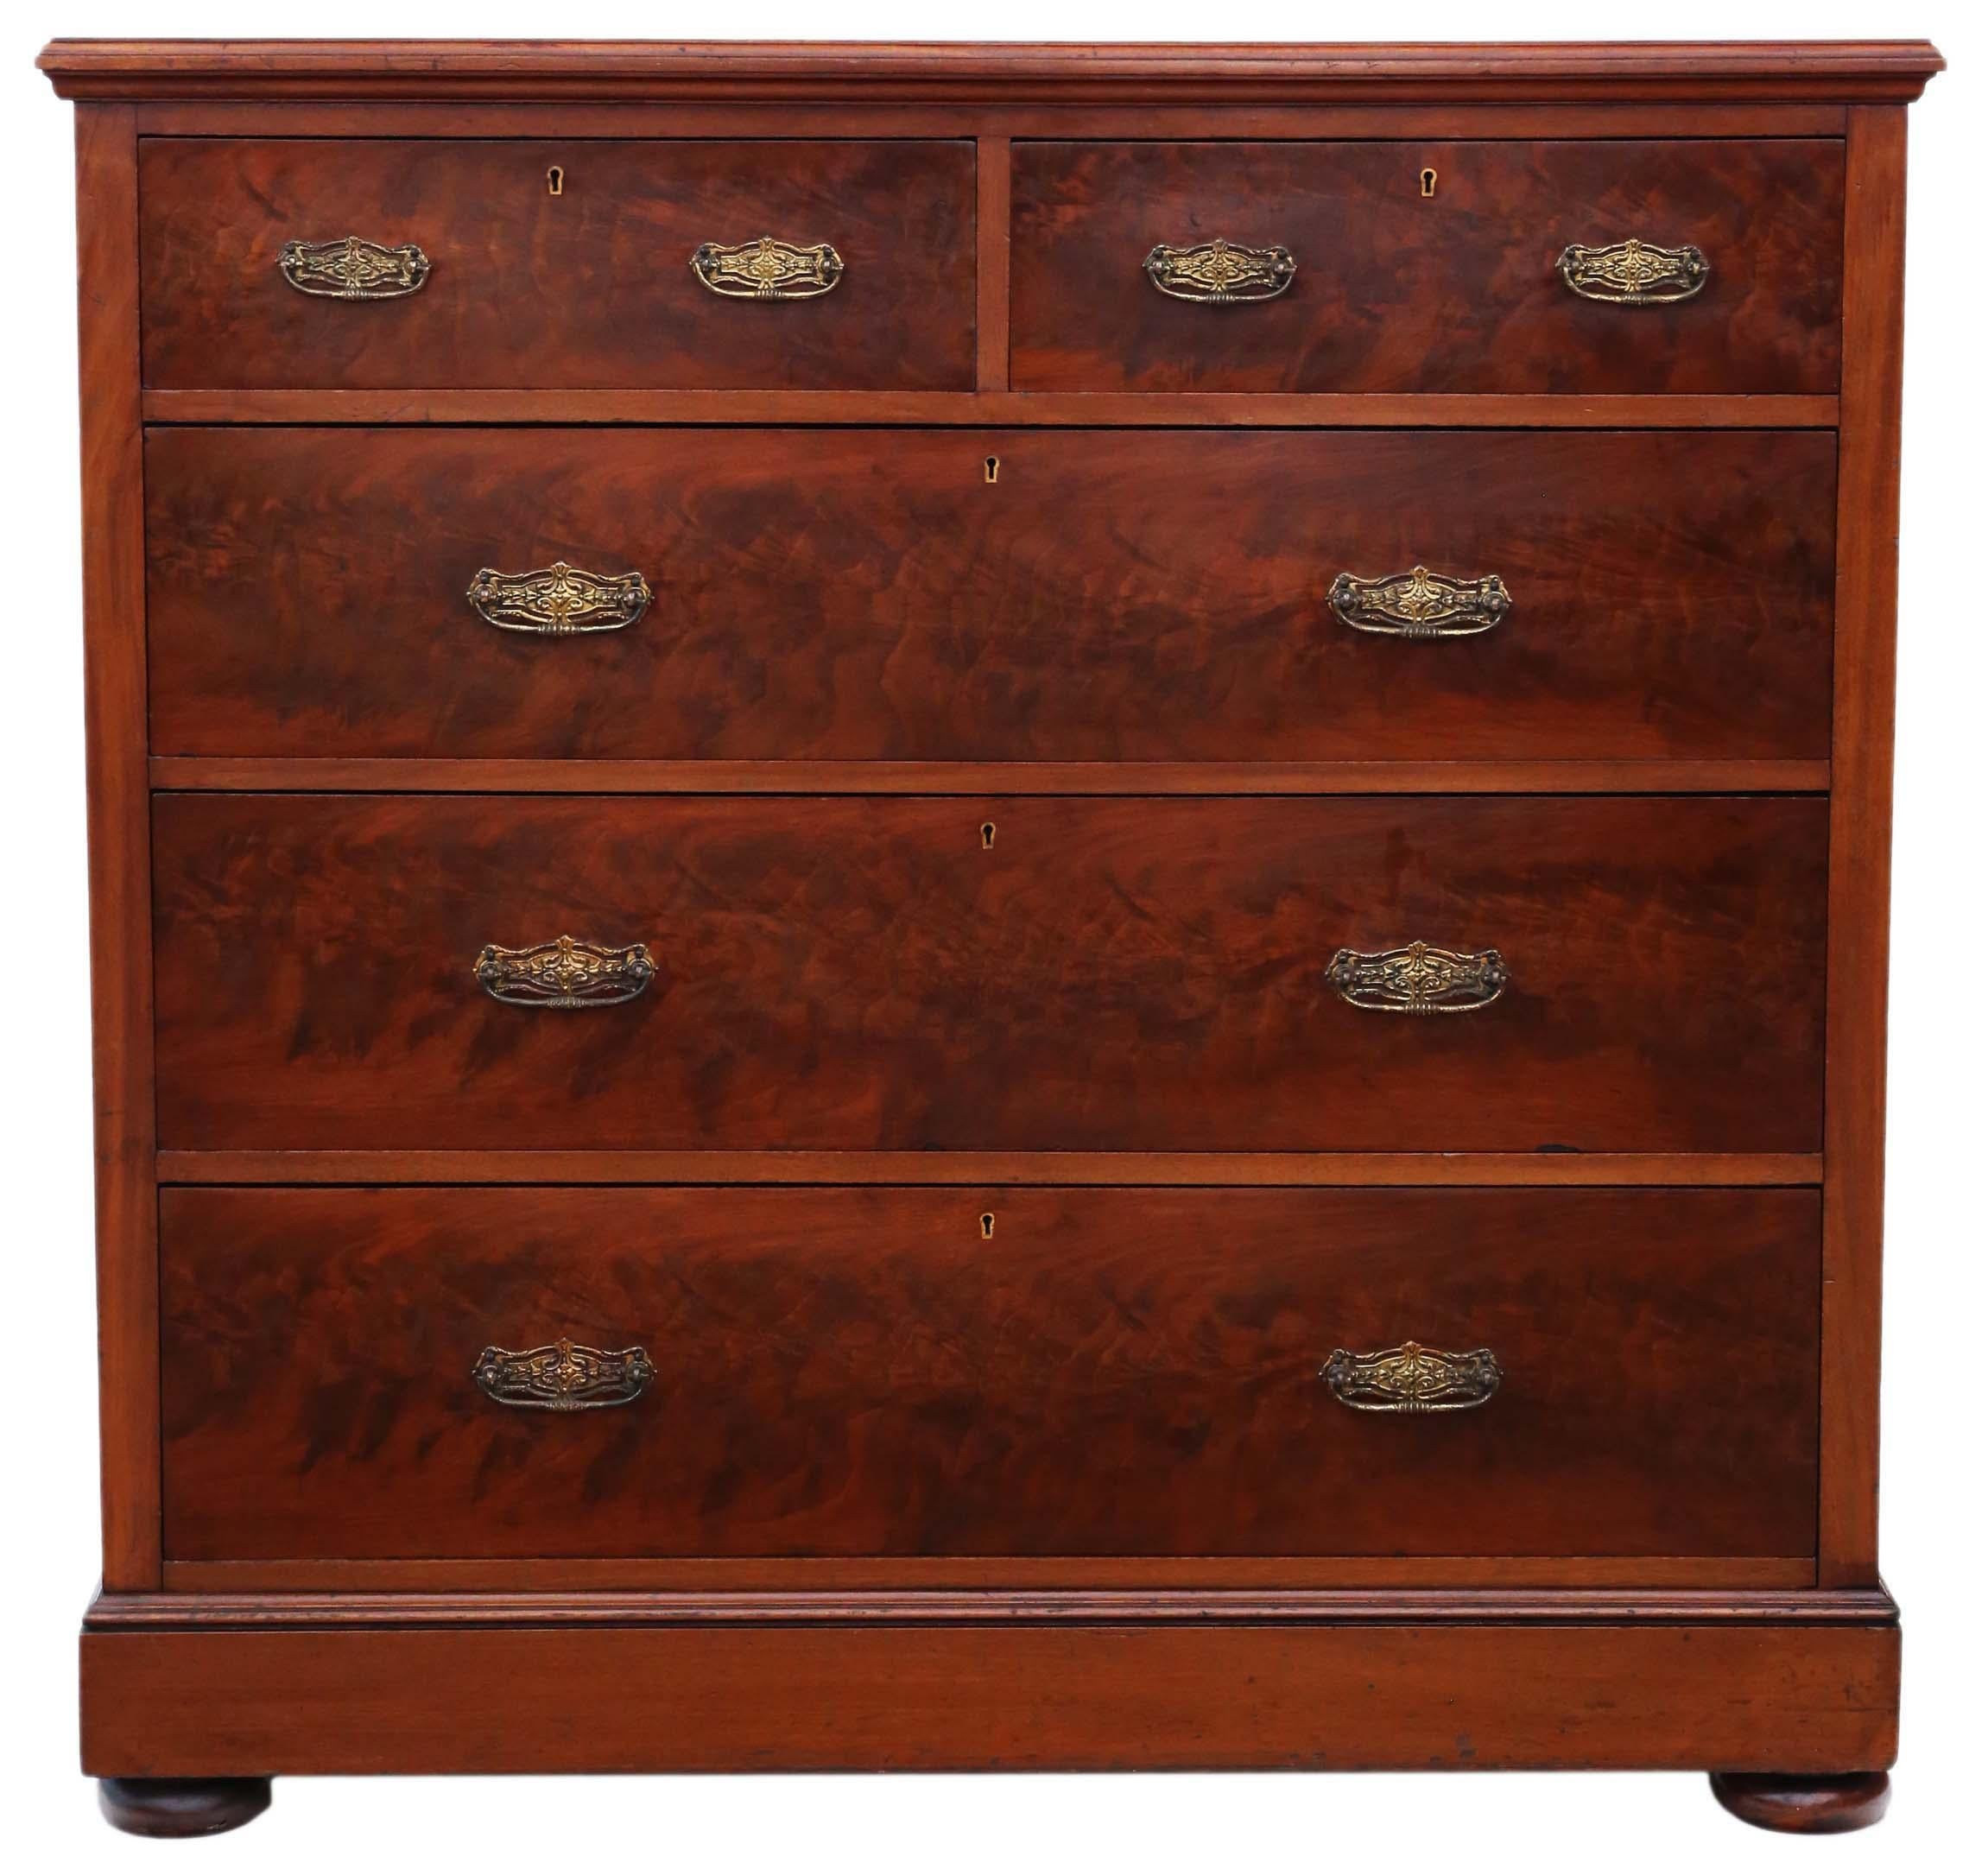 This Victorian flame mahogany chest of drawers, dating back to around 1900, showcases exquisite craftsmanship and generous proportions.

Ensuring stability, there are no loose joints, and the drawers, lined with ash, operate smoothly. This piece